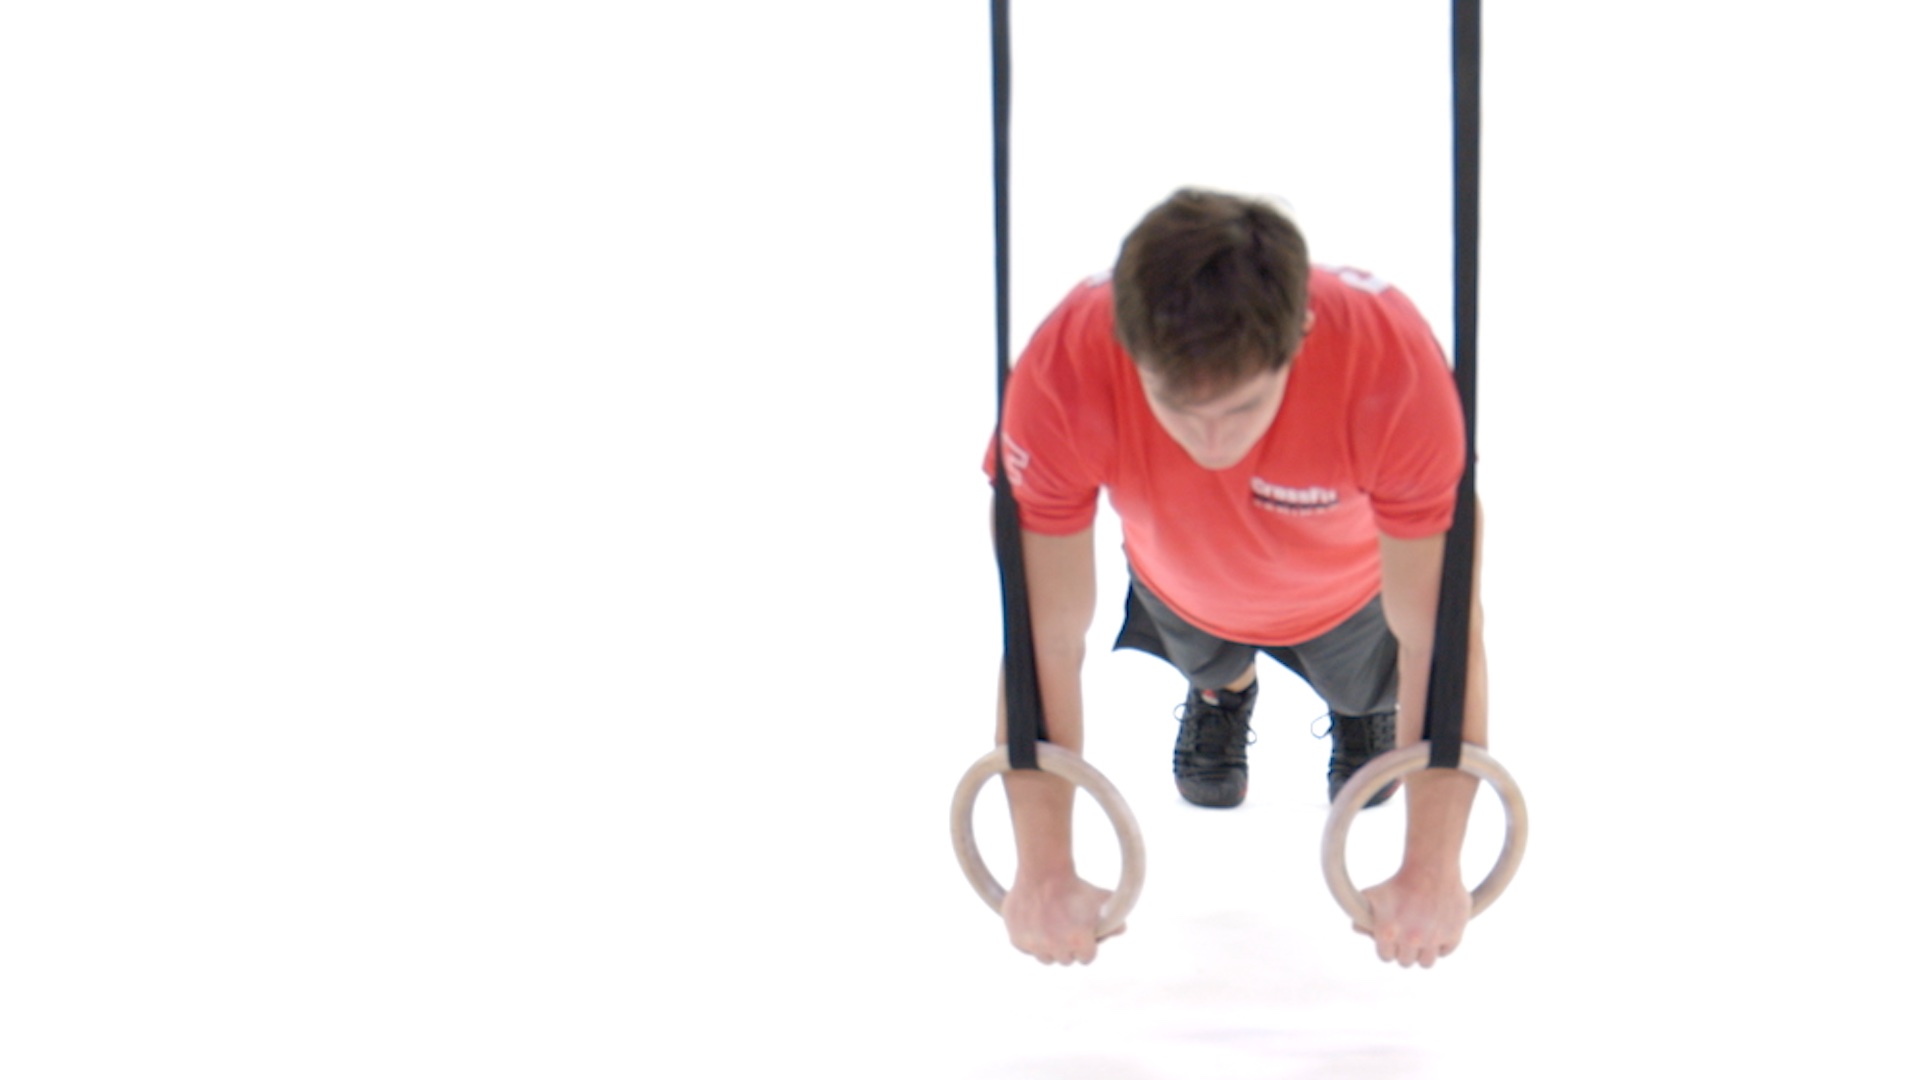 Reverse grip ring push-ups. For when you absotively posilutely need to make  an exercise's way harder. #bravo . . . #bettereveryday #thirstythursday |  By Ambition AthleticsFacebook